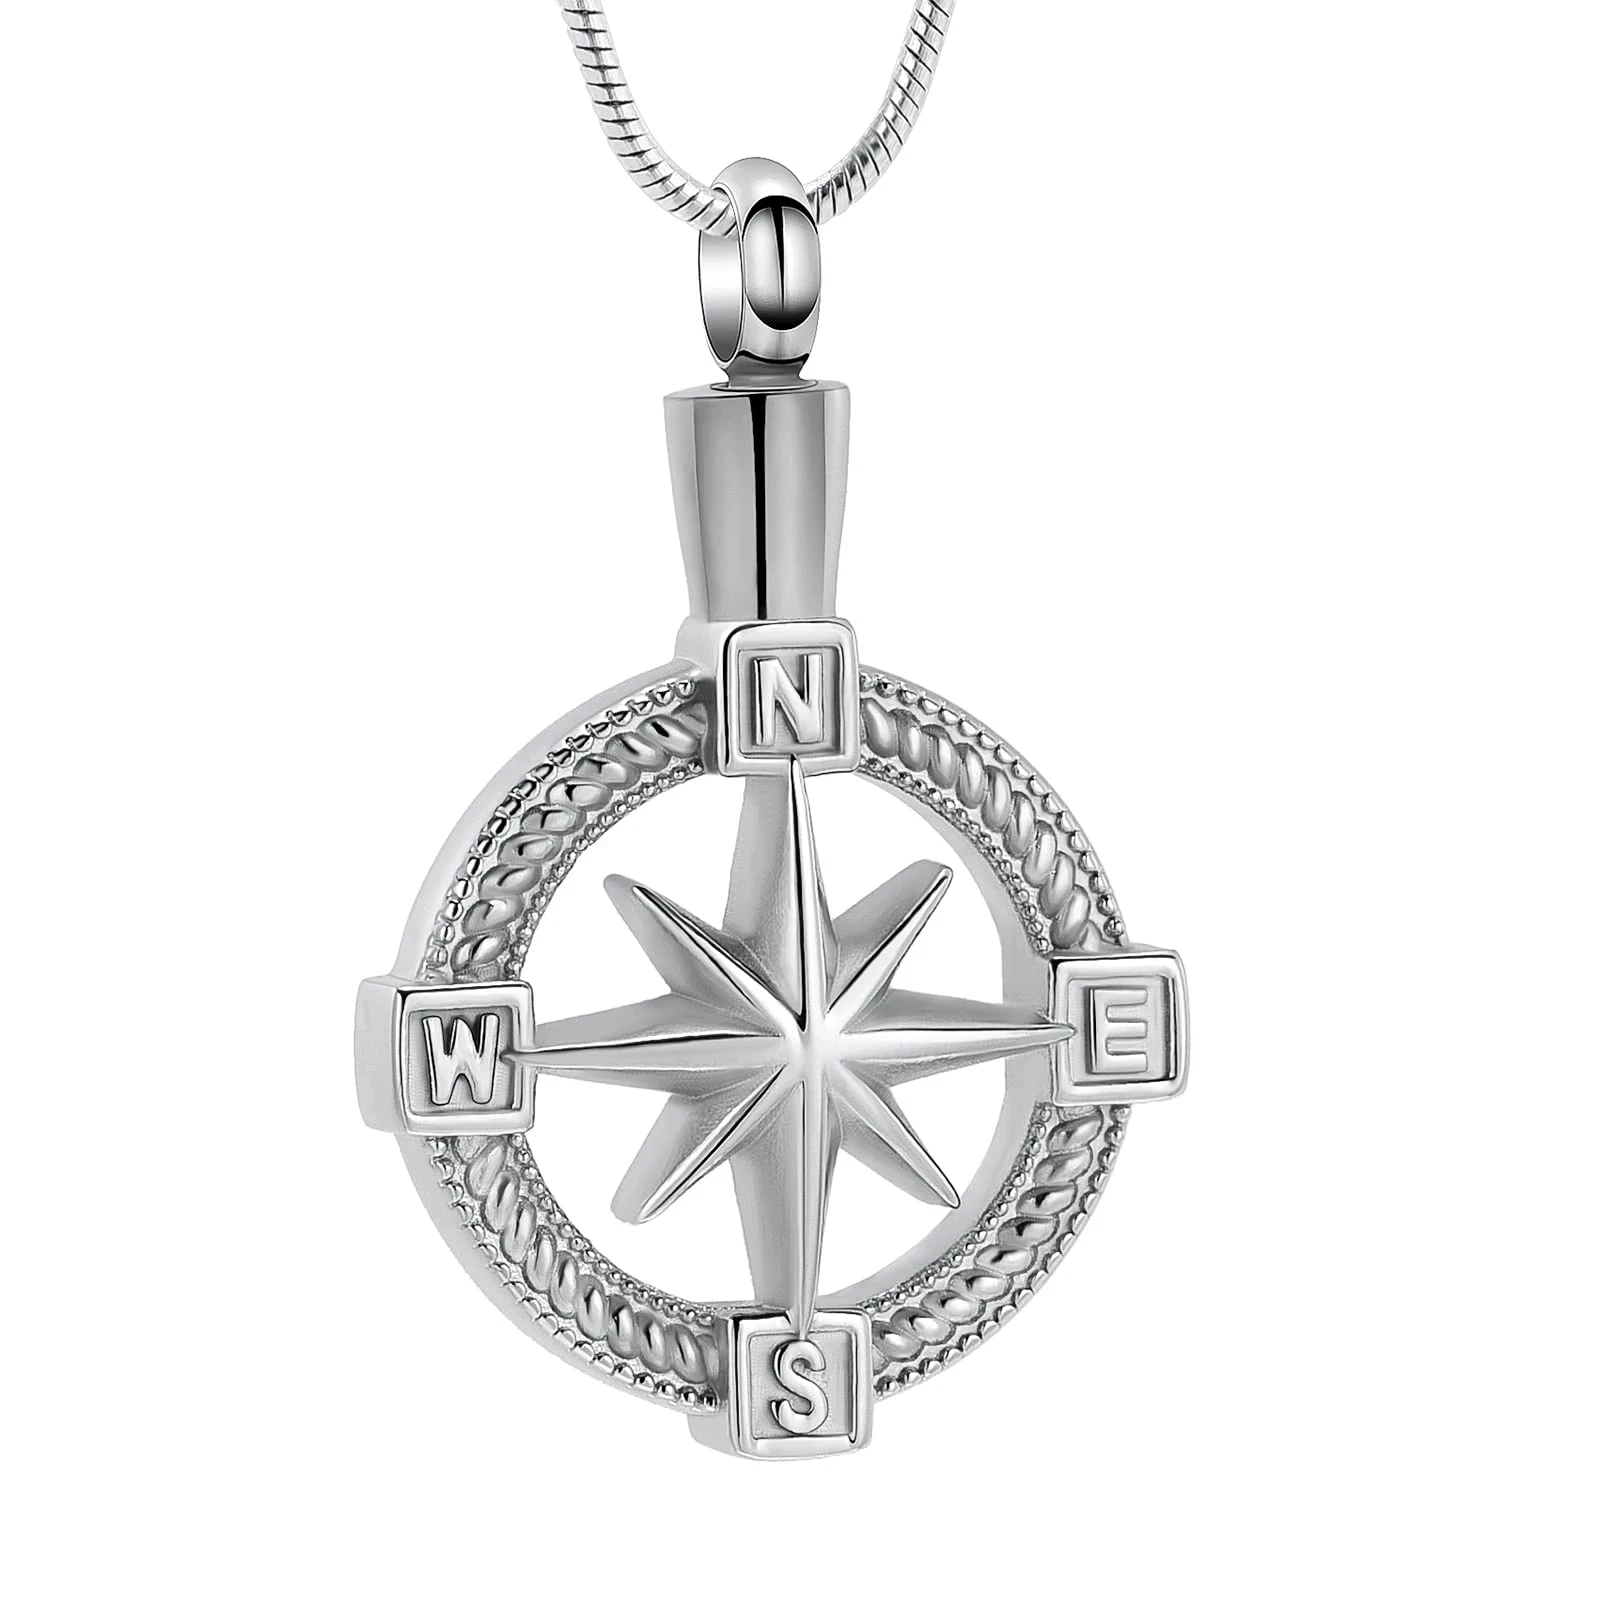 

Stainless Steel Compass Cremation Jewelry Pendant For Human Pet Memorial Urn Necklace Ashes Holder Keepsake GIfts Women Men